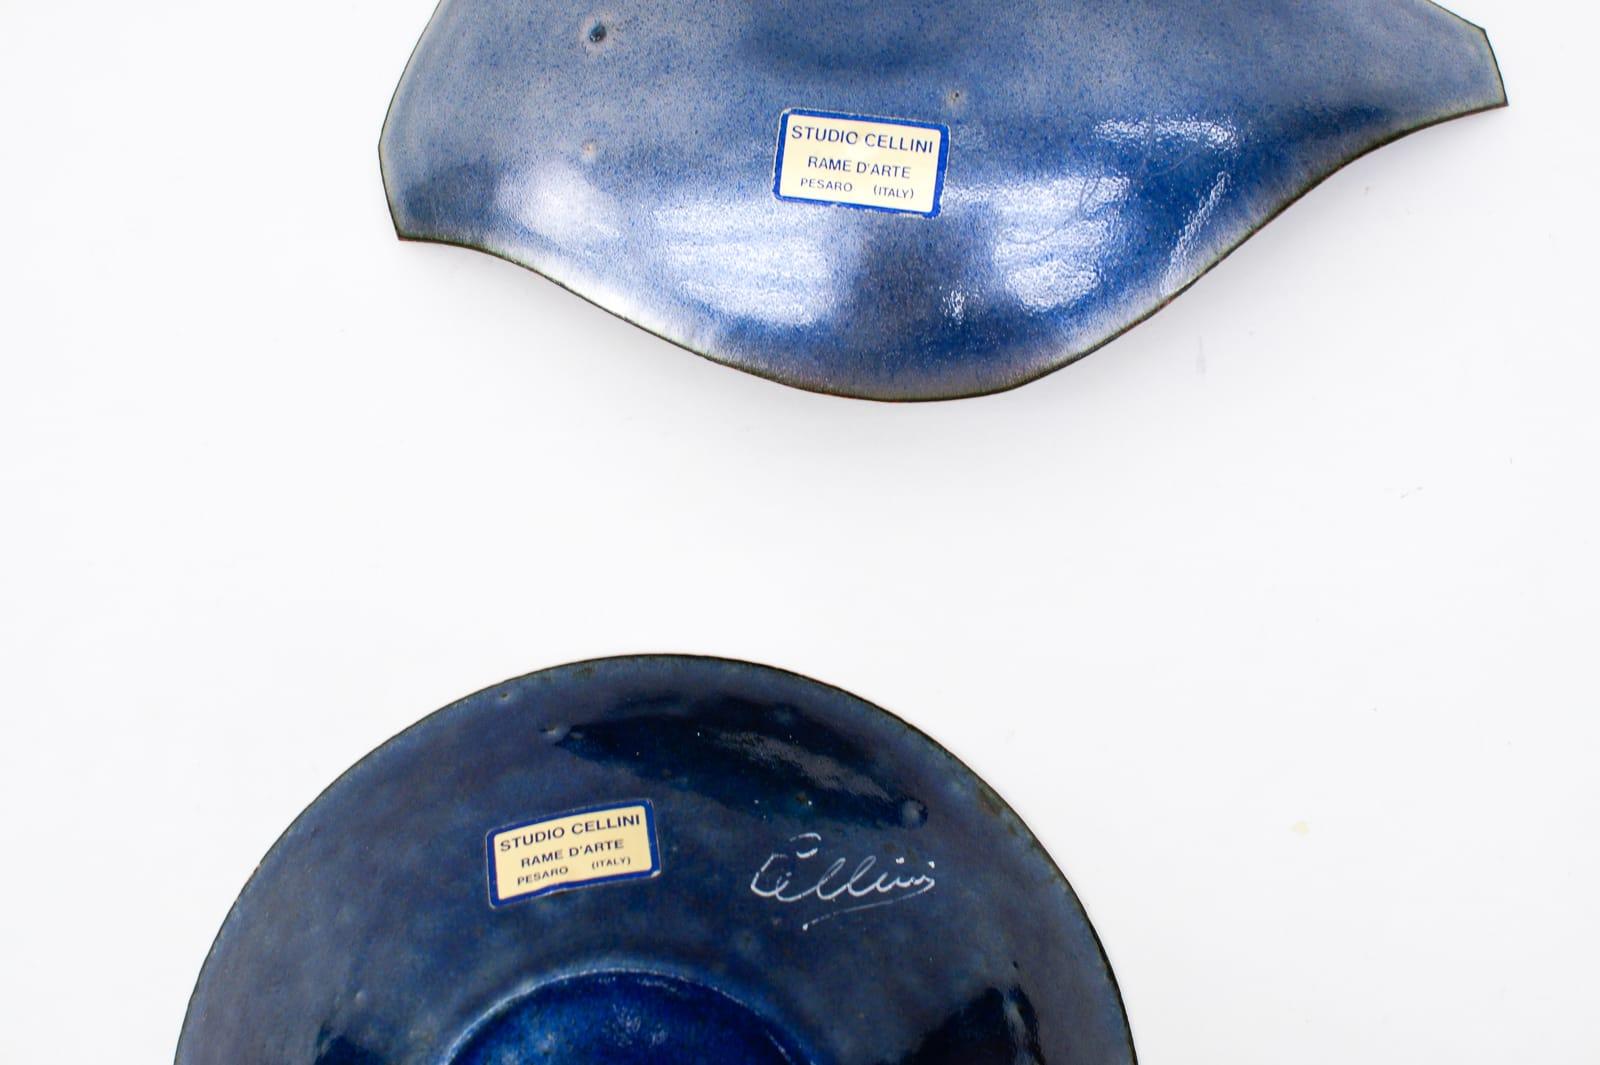 Set of Thre Modernist Bowls in Copper With Beautiful Studio Cellini Rame D'Arte  For Sale 5